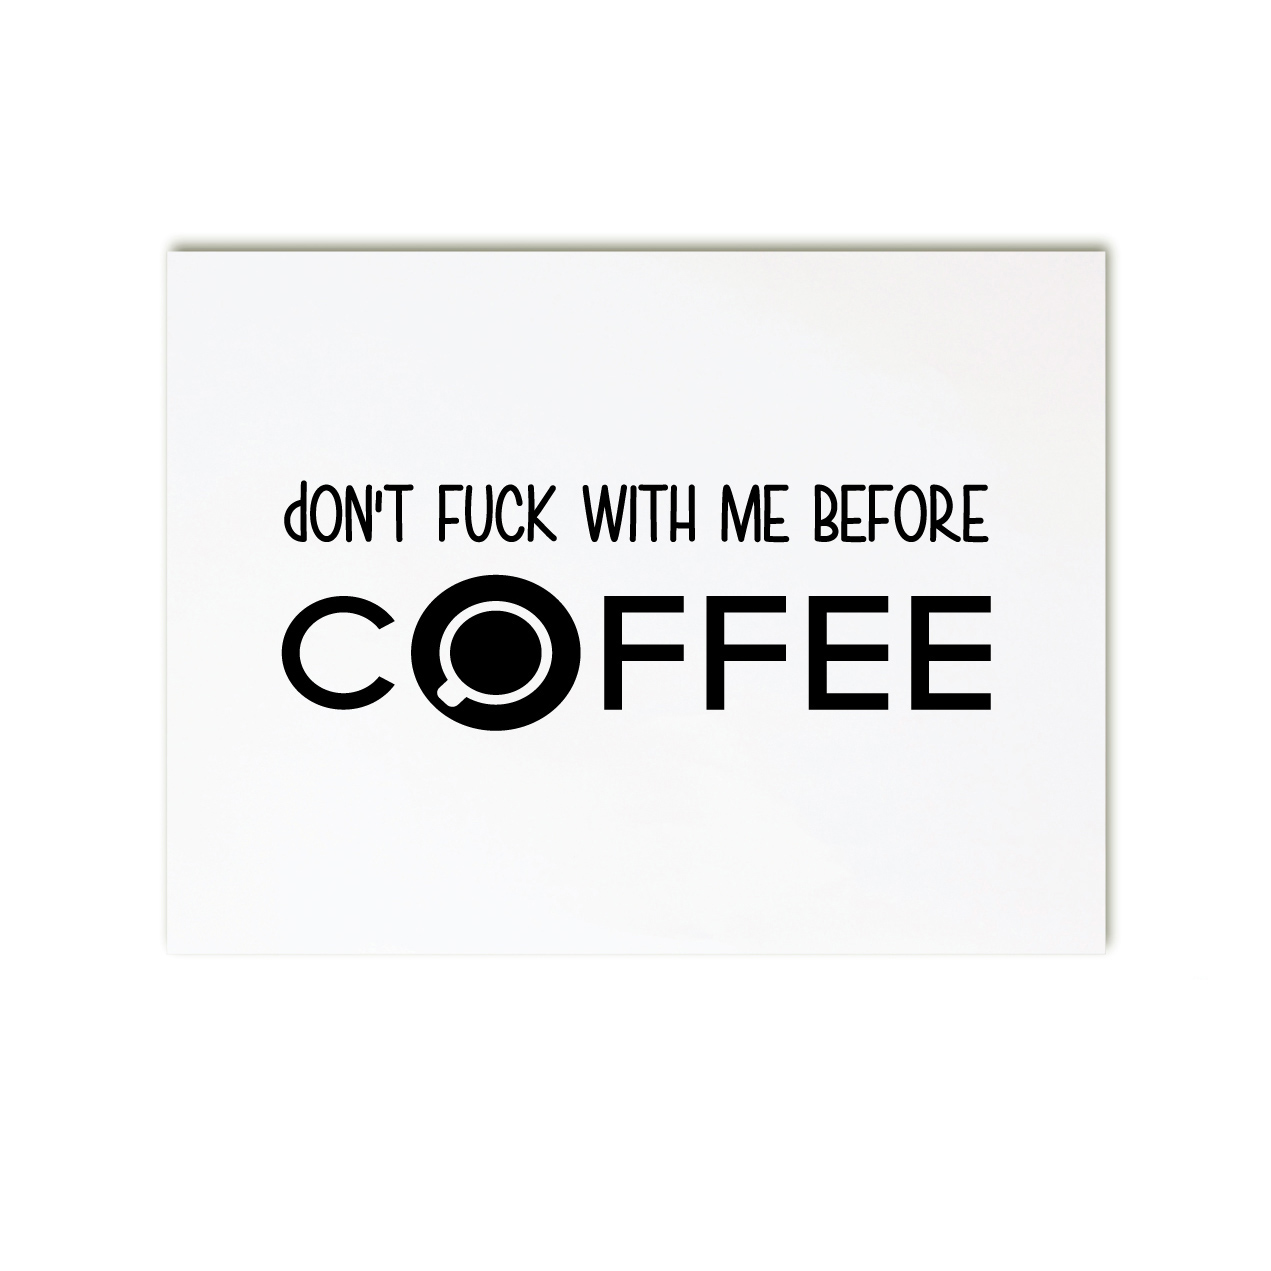 Dont-fuck-before-coffee